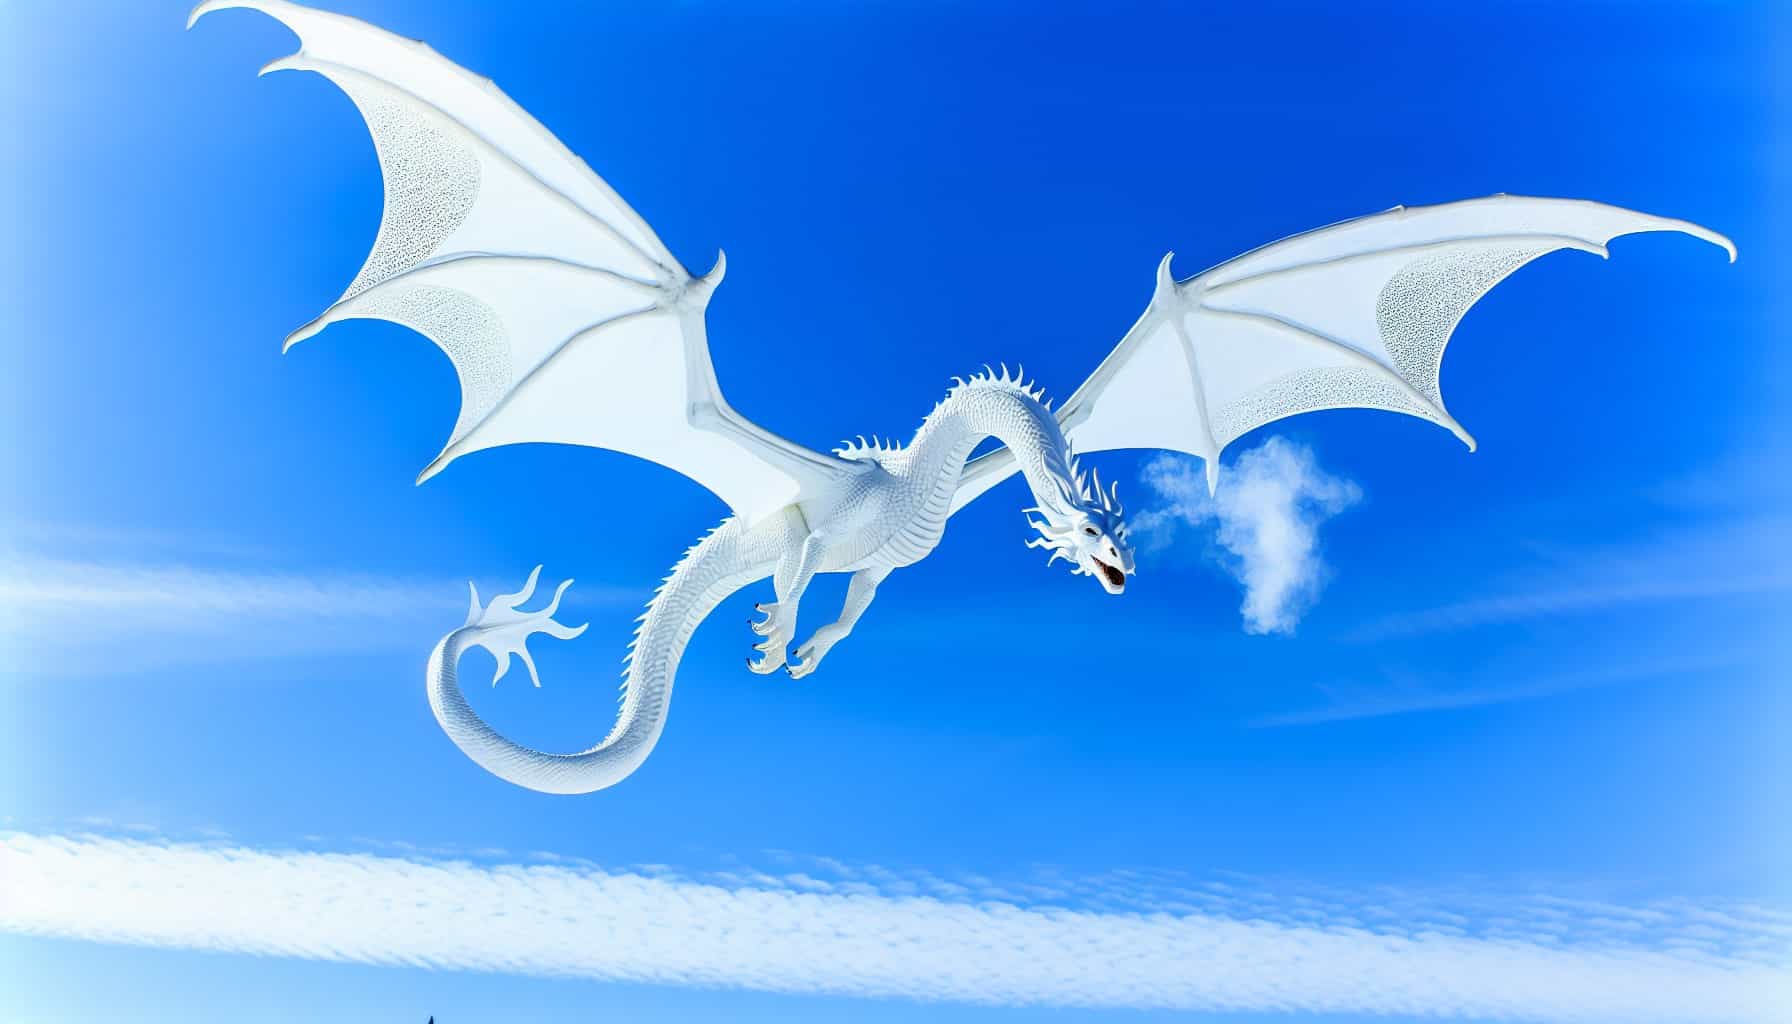 White dragon dream meaning - A white dragon flying in a blue sky